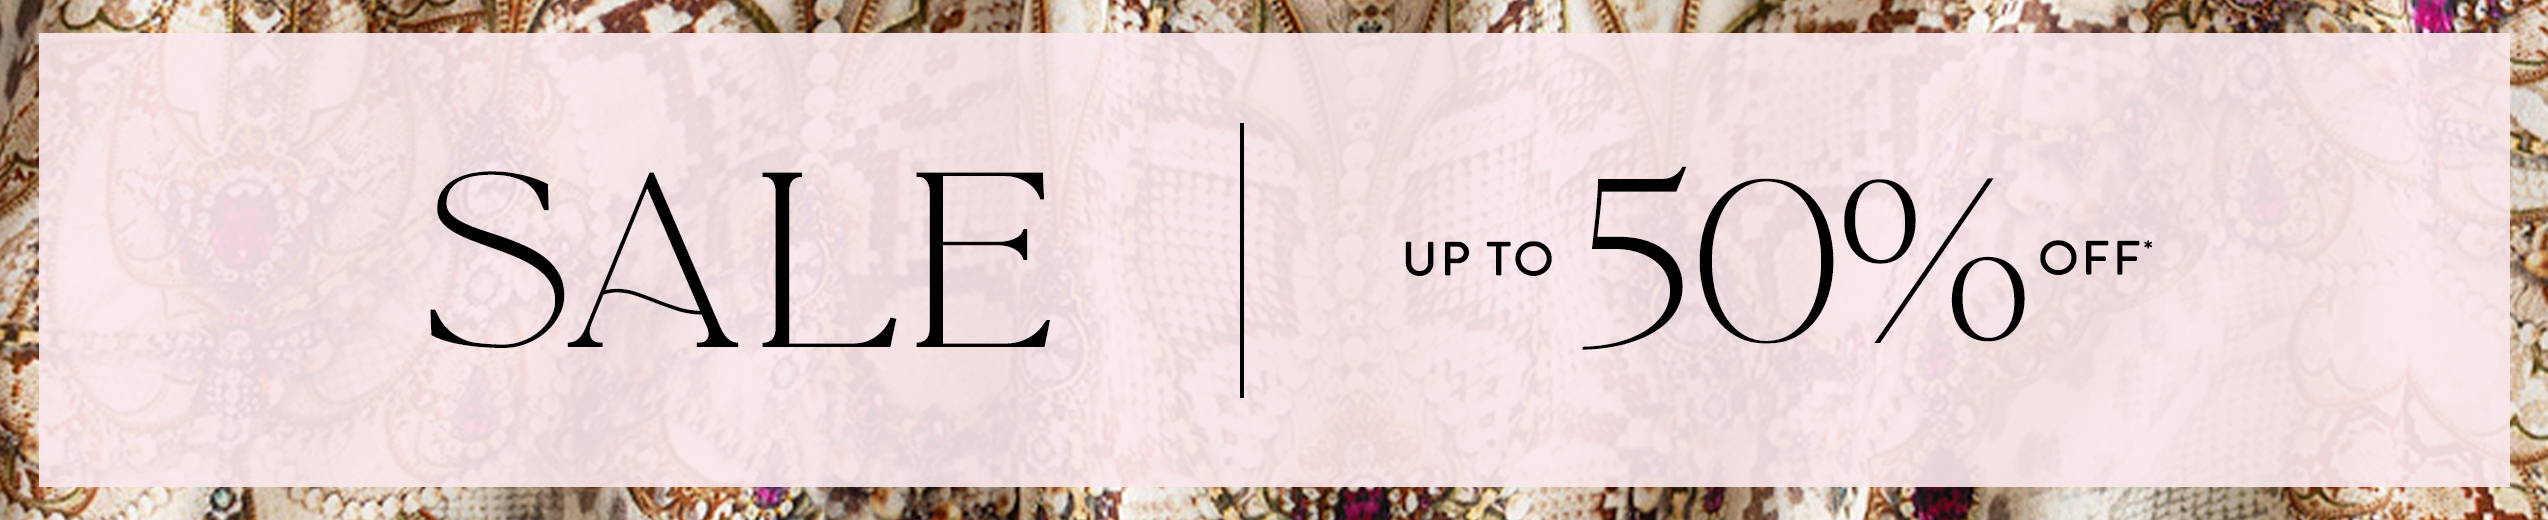 SALE | up to 50% off*